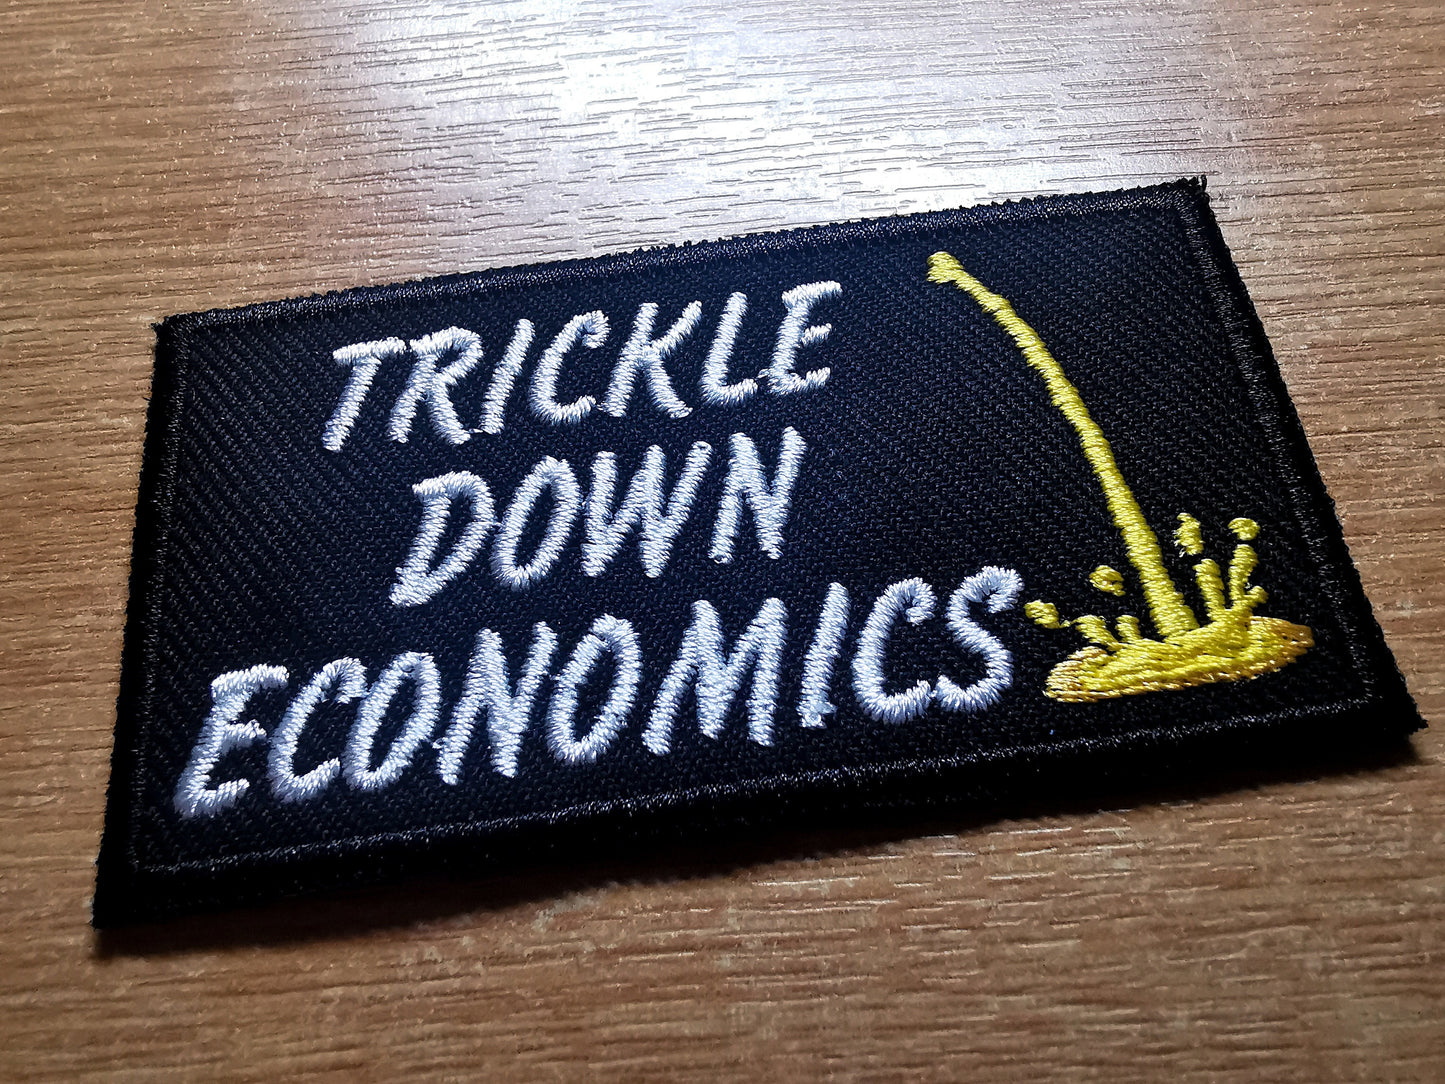 Trickle Down Economics Patch Funny Political Embroidered Patches